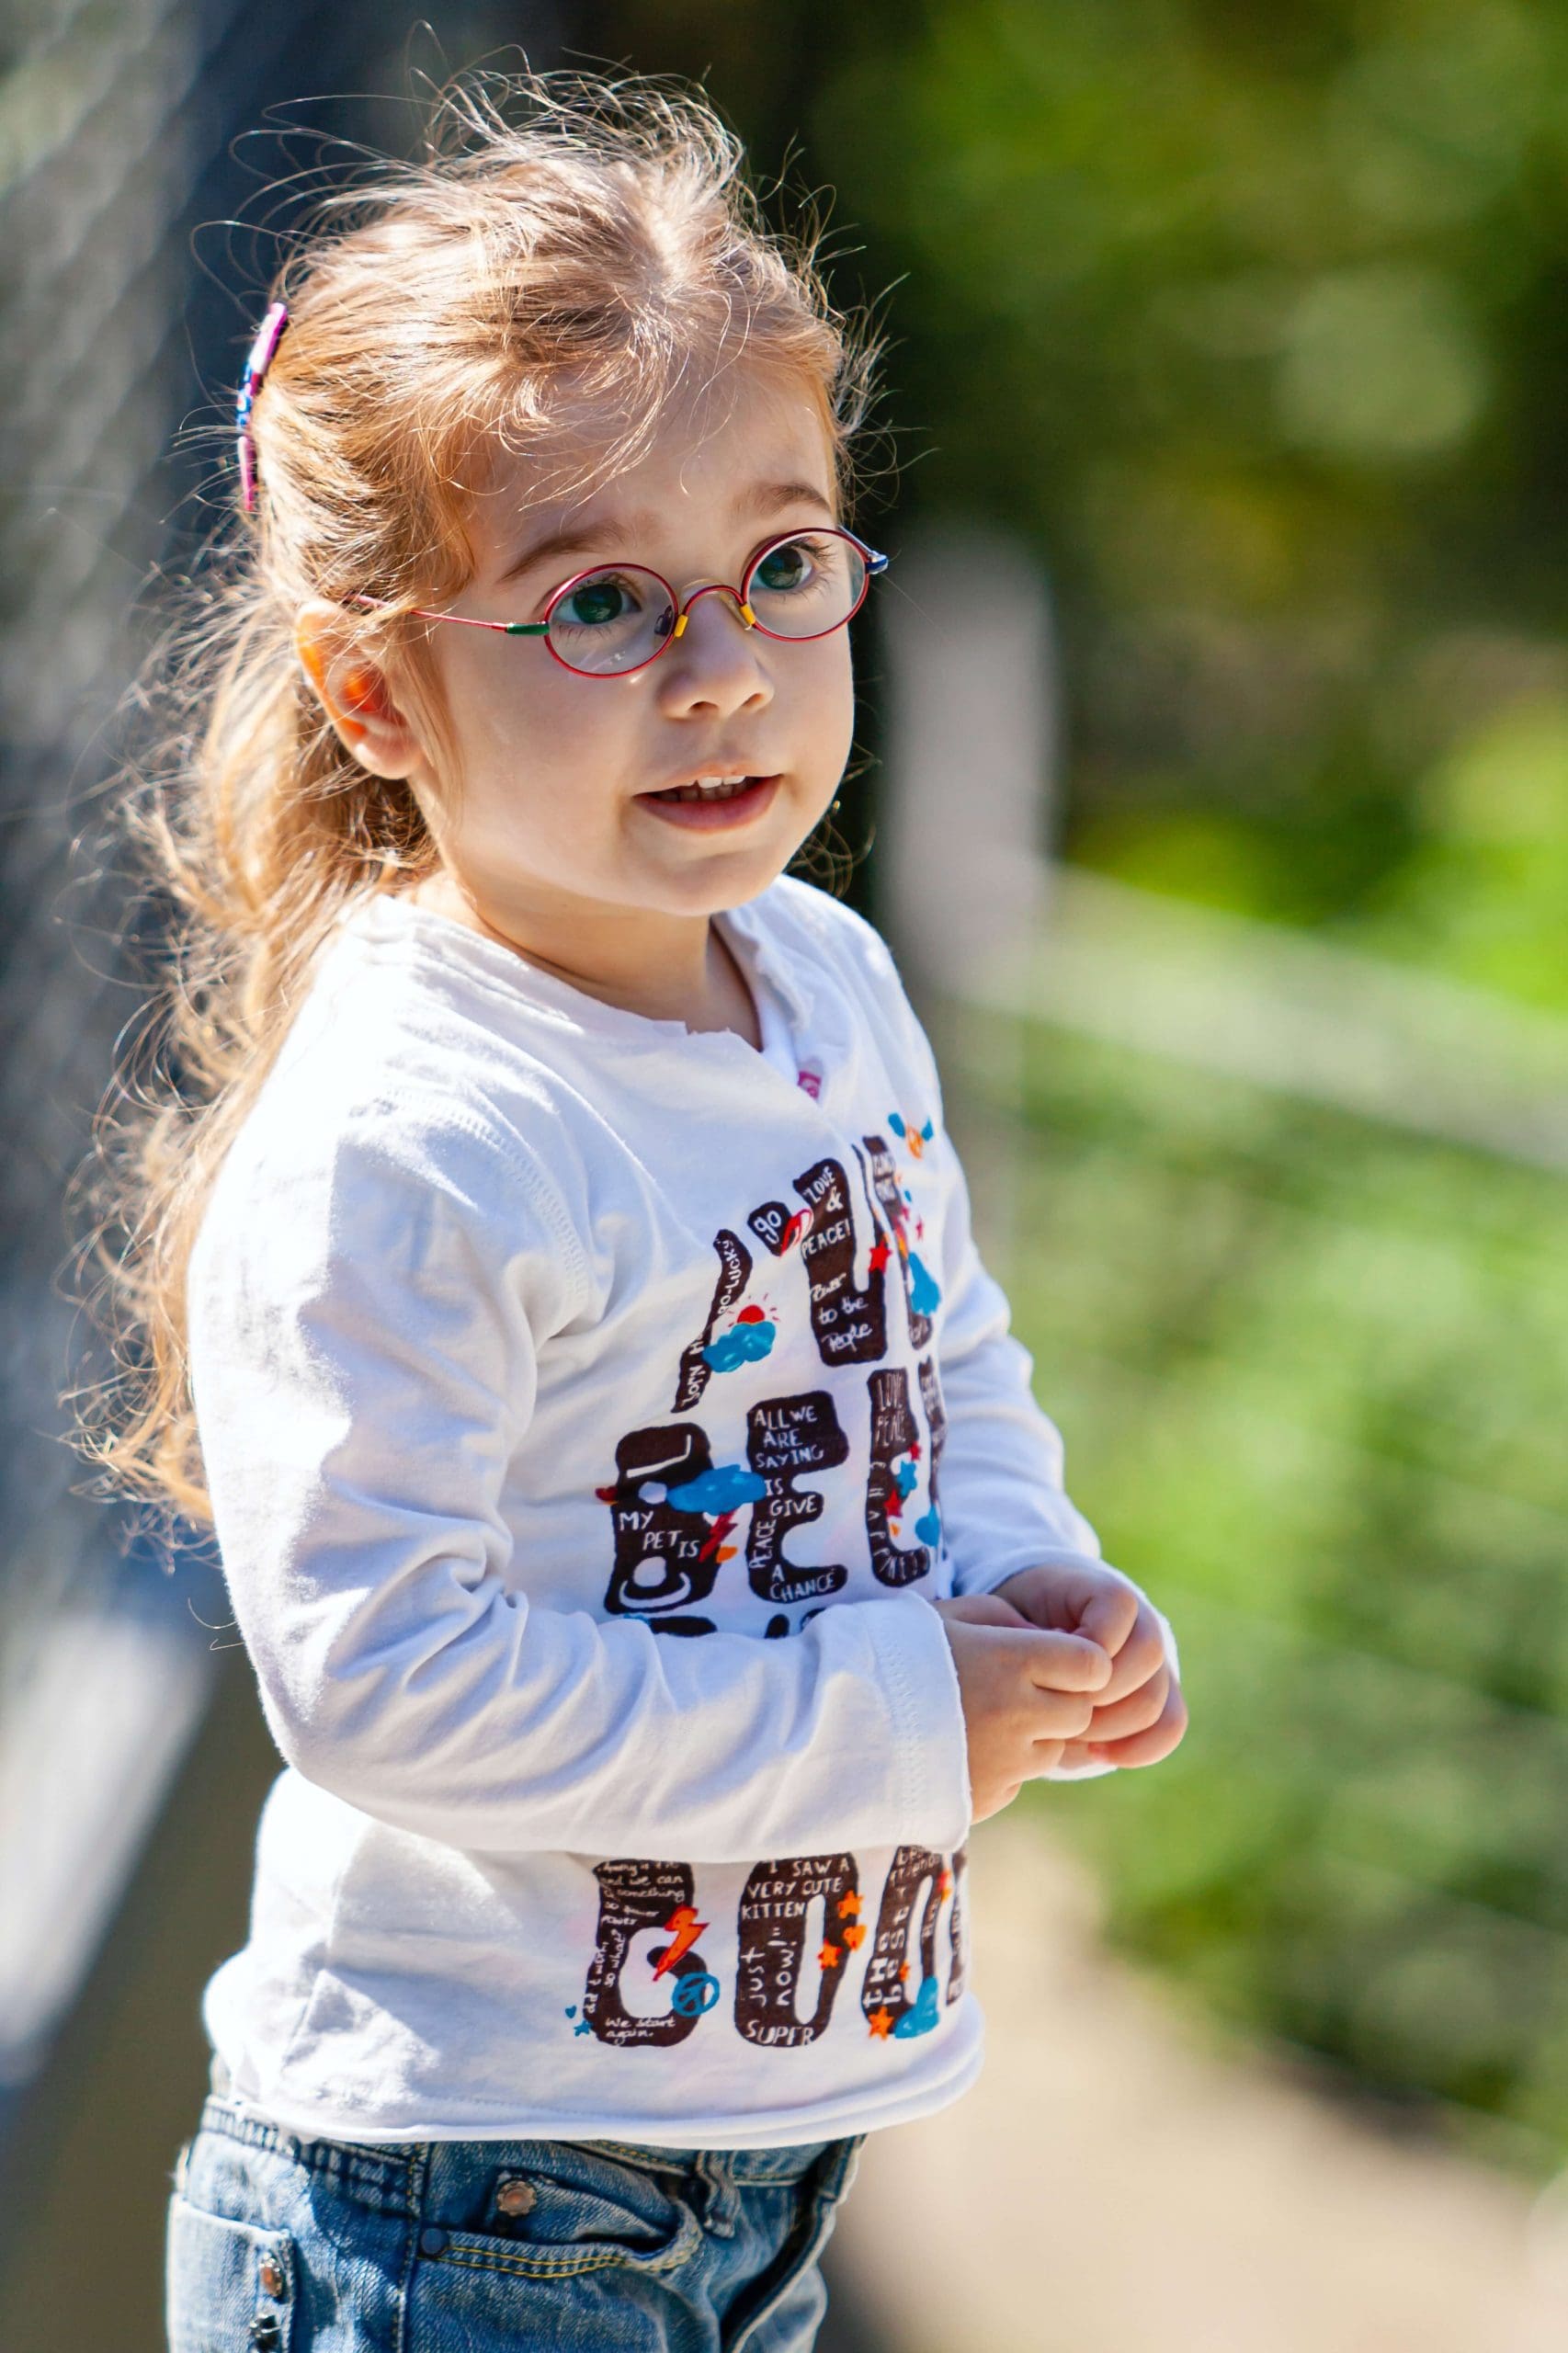 Young girl with glasses outside on a sunny day